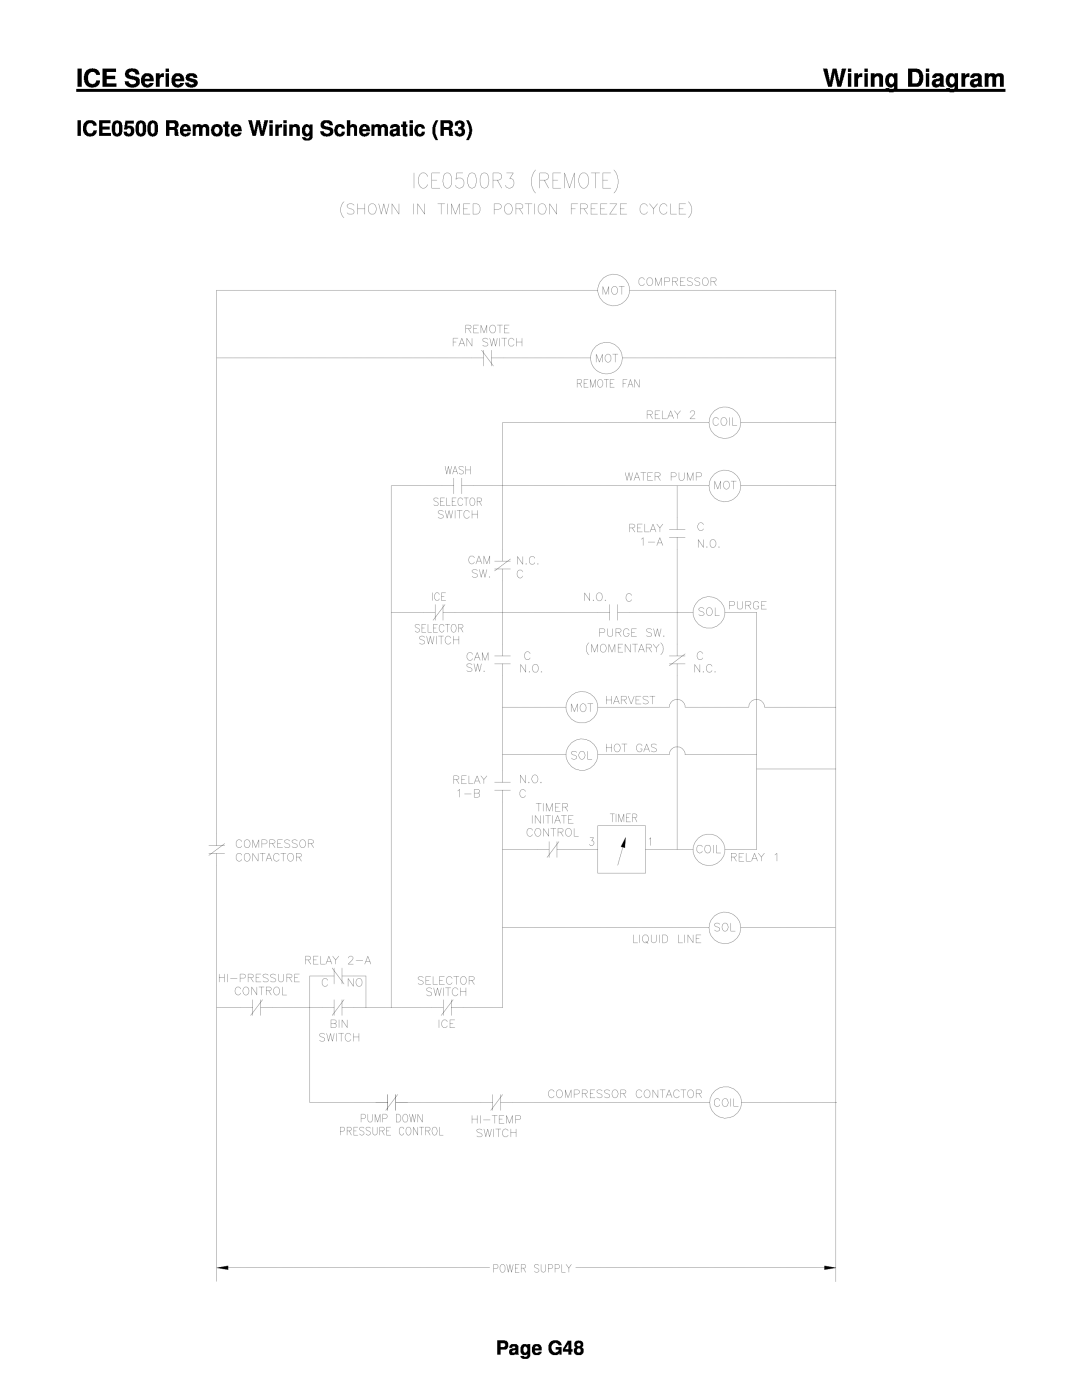 Ice-O-Matic ICE0250 Series installation manual ICE0500 Remote Wiring Schematic R3, ICE Series, Wiring Diagram, Page G48 